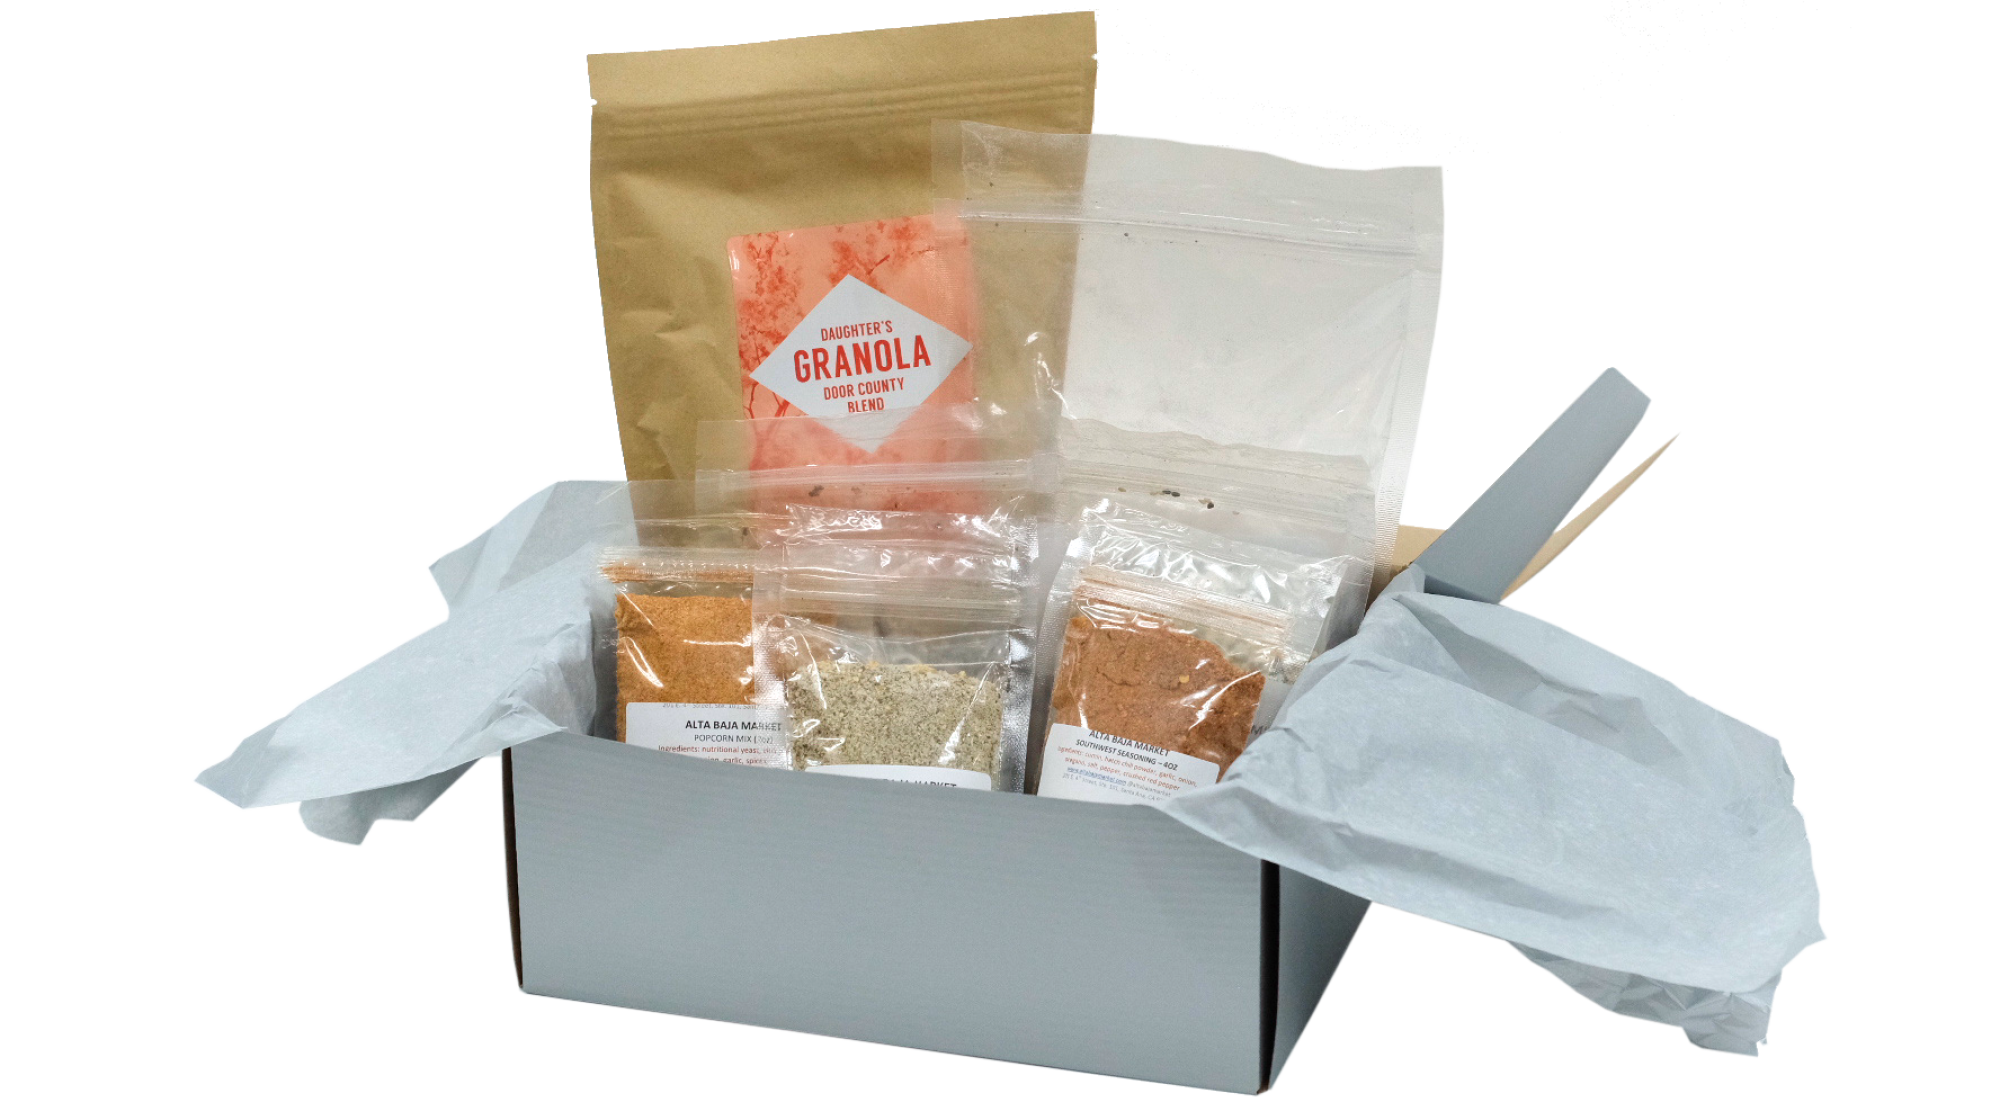 A pantry box by Alta Baja containing packets of granola and spices